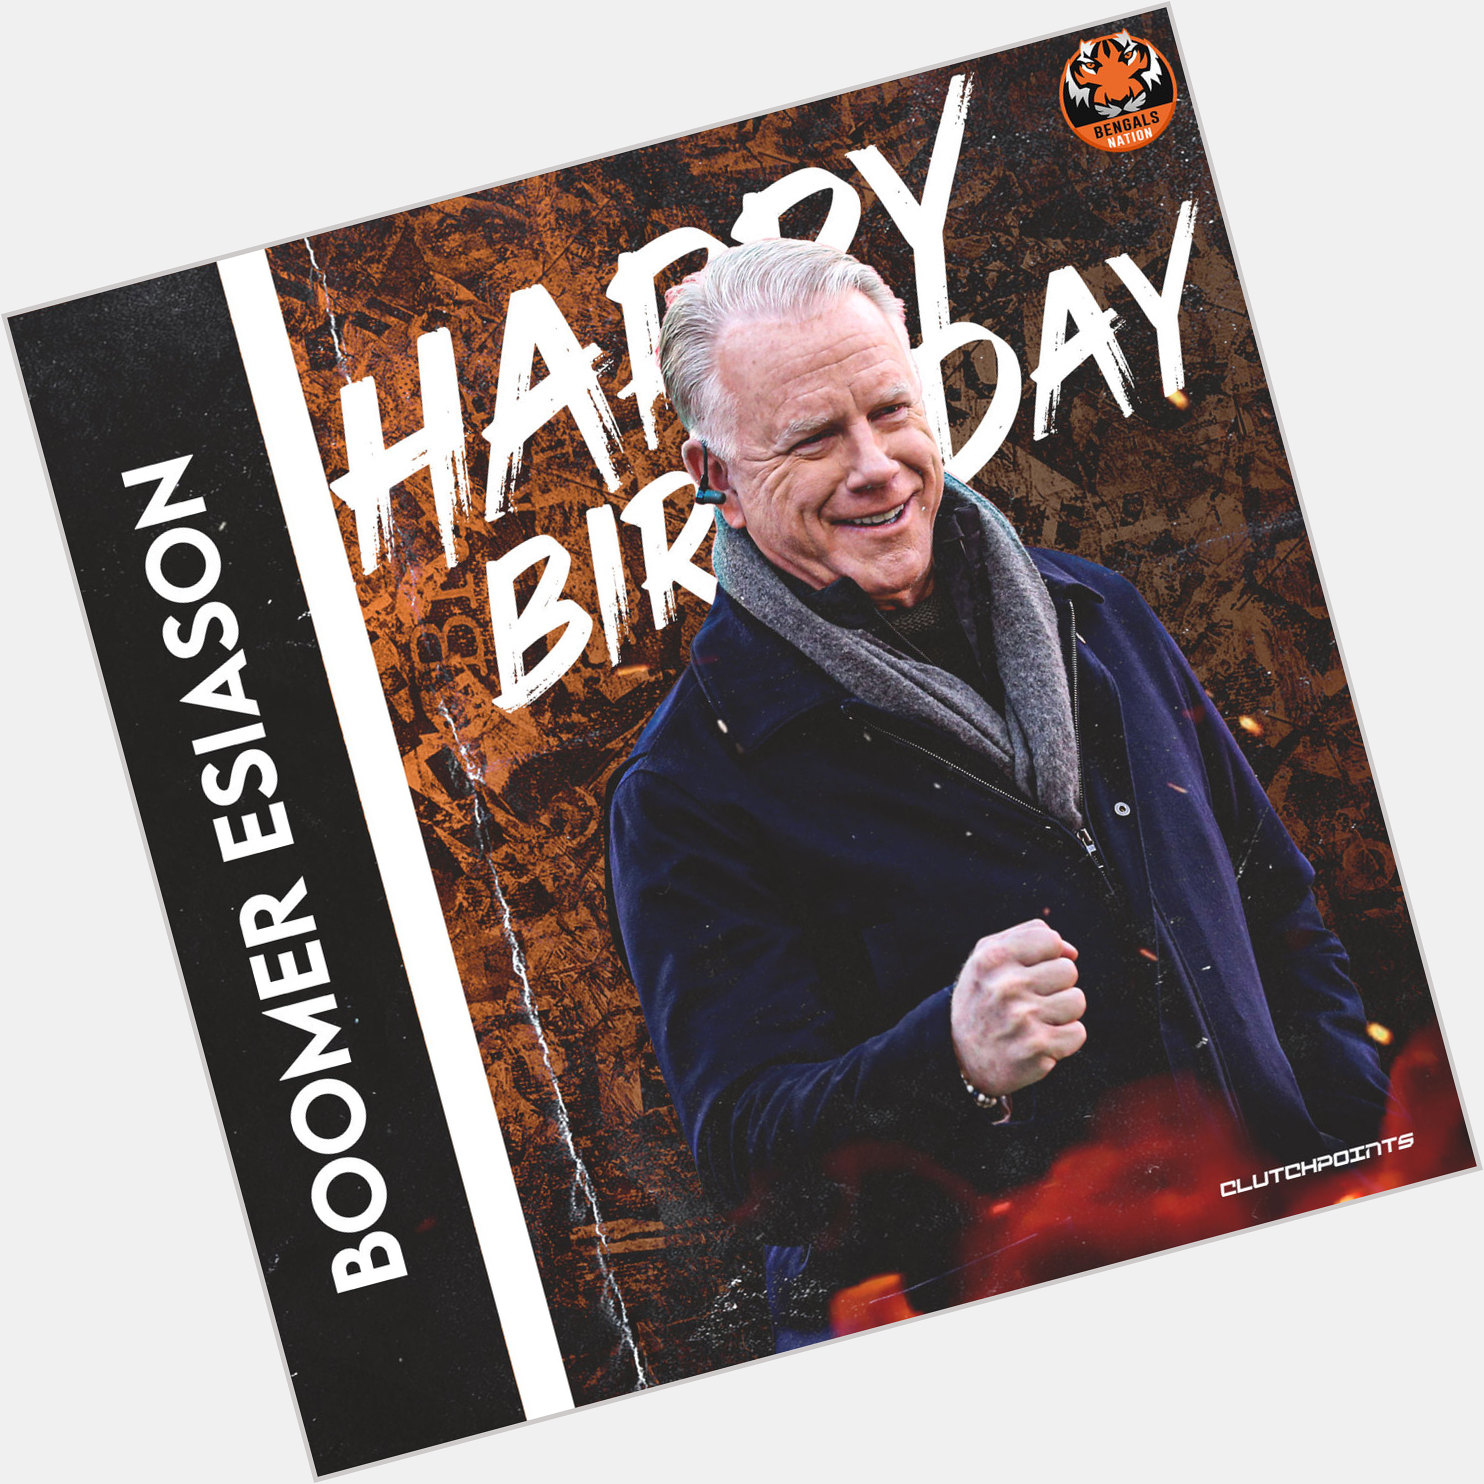 Join Bengals Nation as we greet 4x Pro Bowler, Boomer Esiason, with a happy 61st birthday 